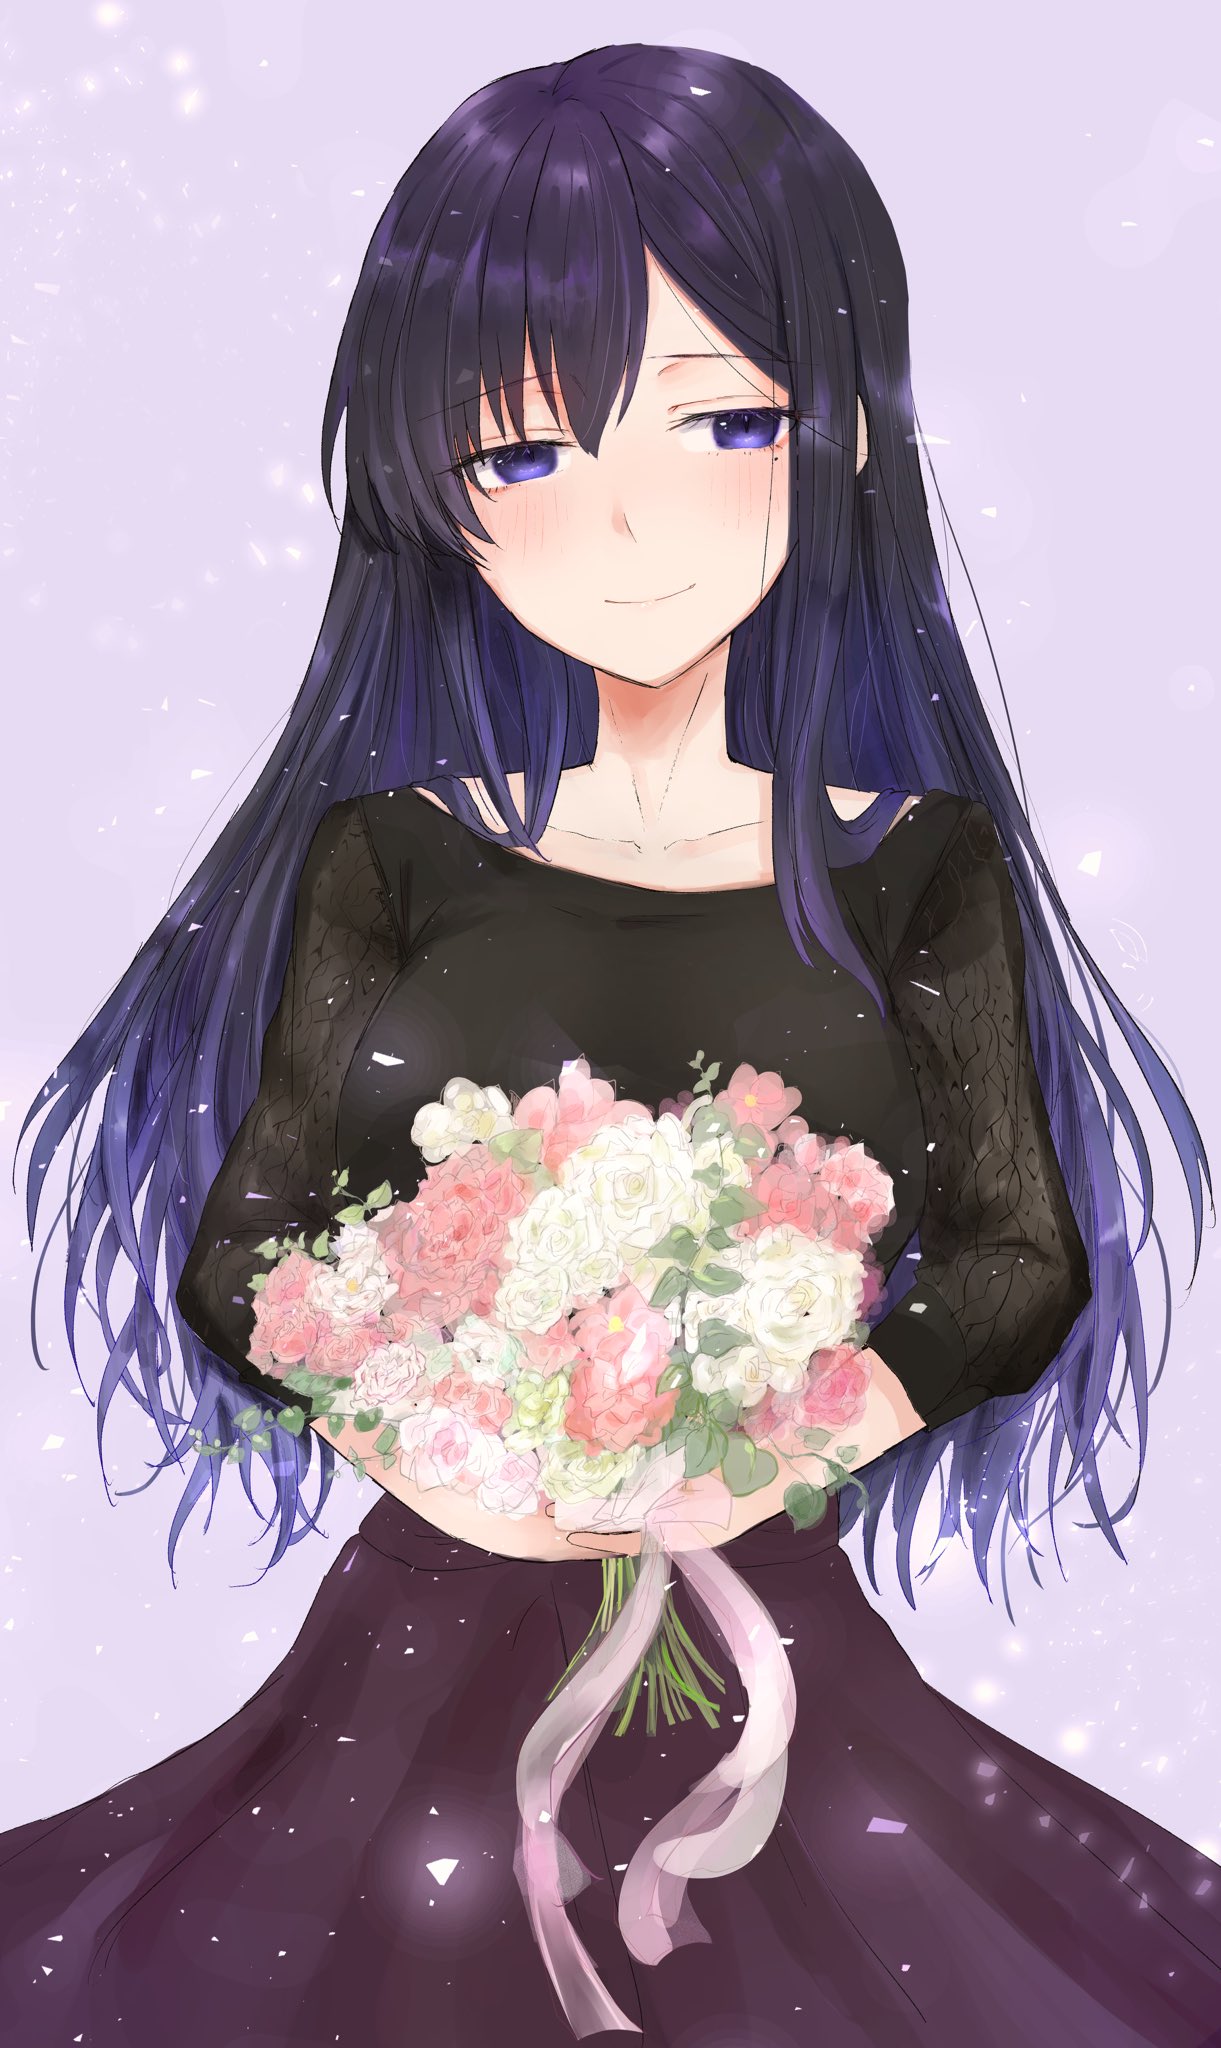 1girl alice_gear_aegis black_hair black_shirt bouquet closed_mouth commentary_request eyebrows_visible_through_hair flower highres holding holding_flower kagome_misaki mole petals purple_skirt shirt sikisikisikibu skirt smile violet_eyes